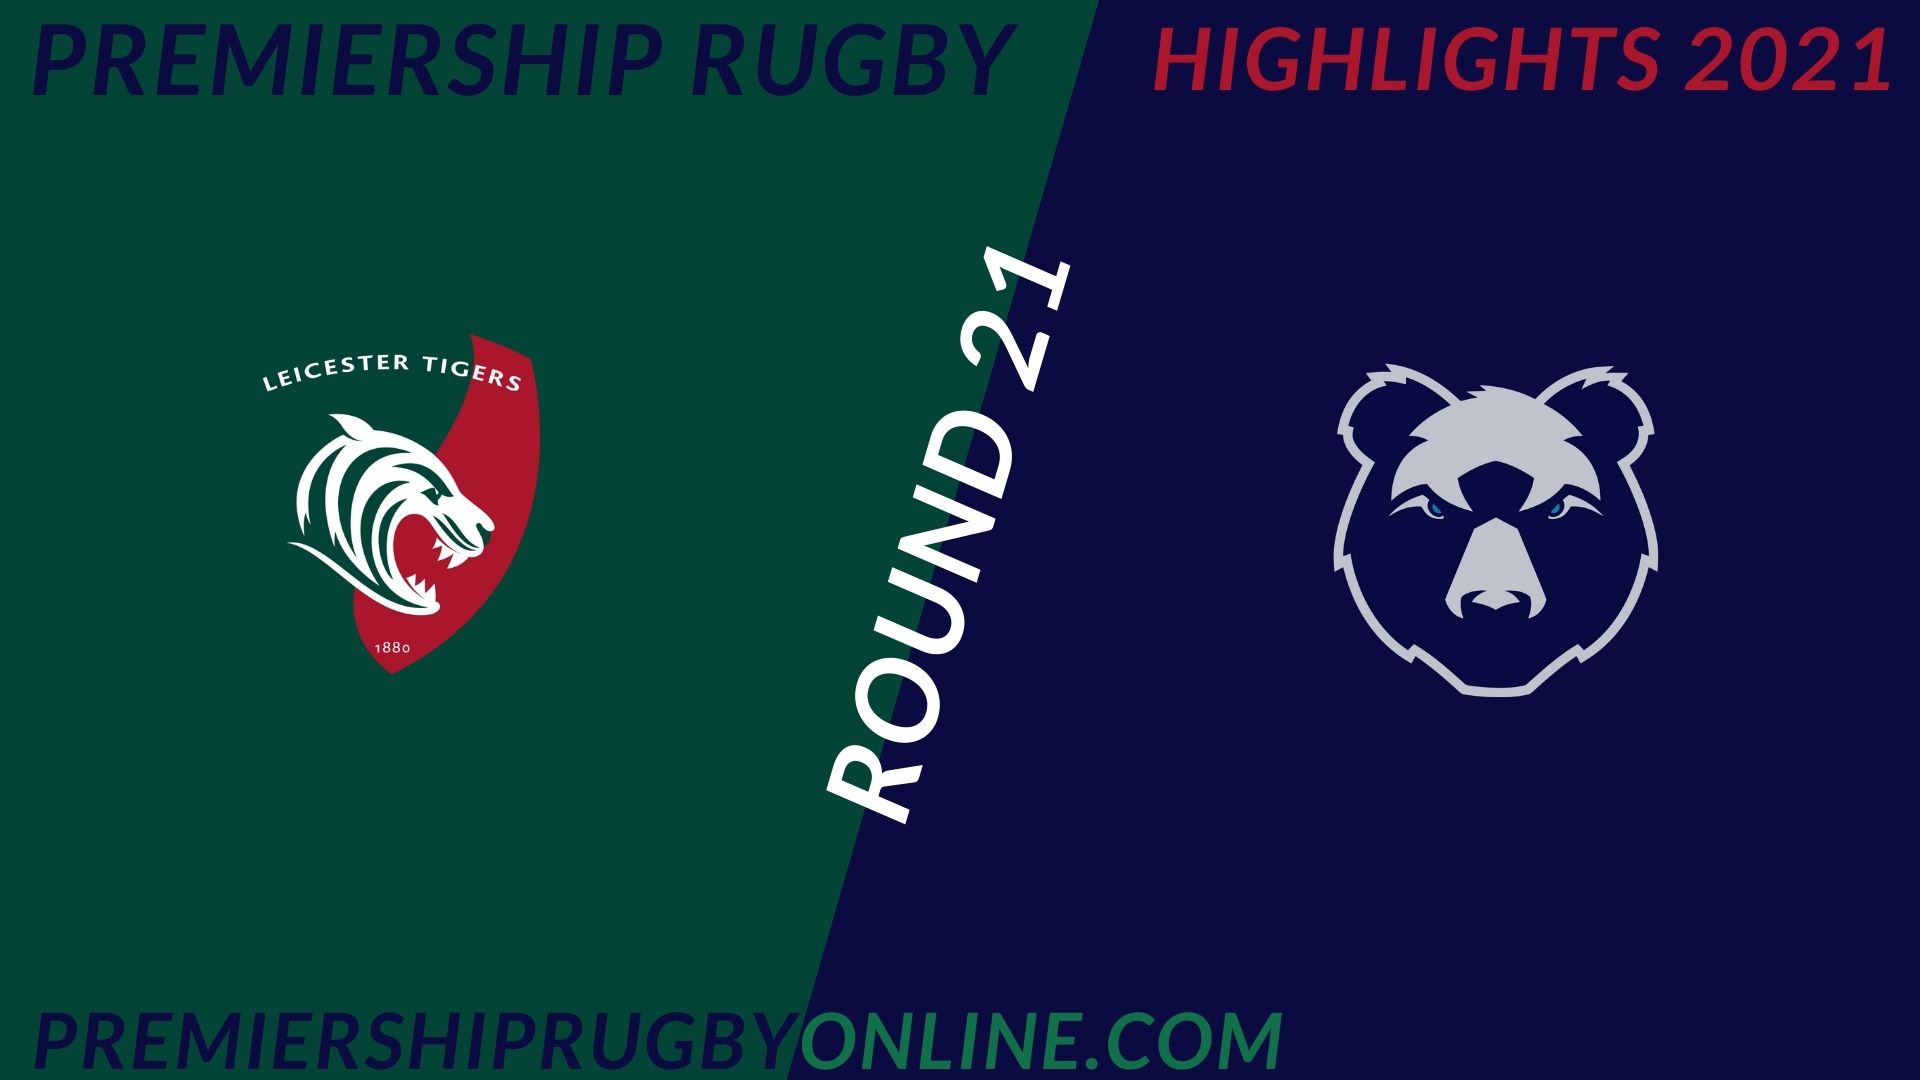 Leicester Tigers Vs Bristol Bears Premiership Rugby 2021 RD 21